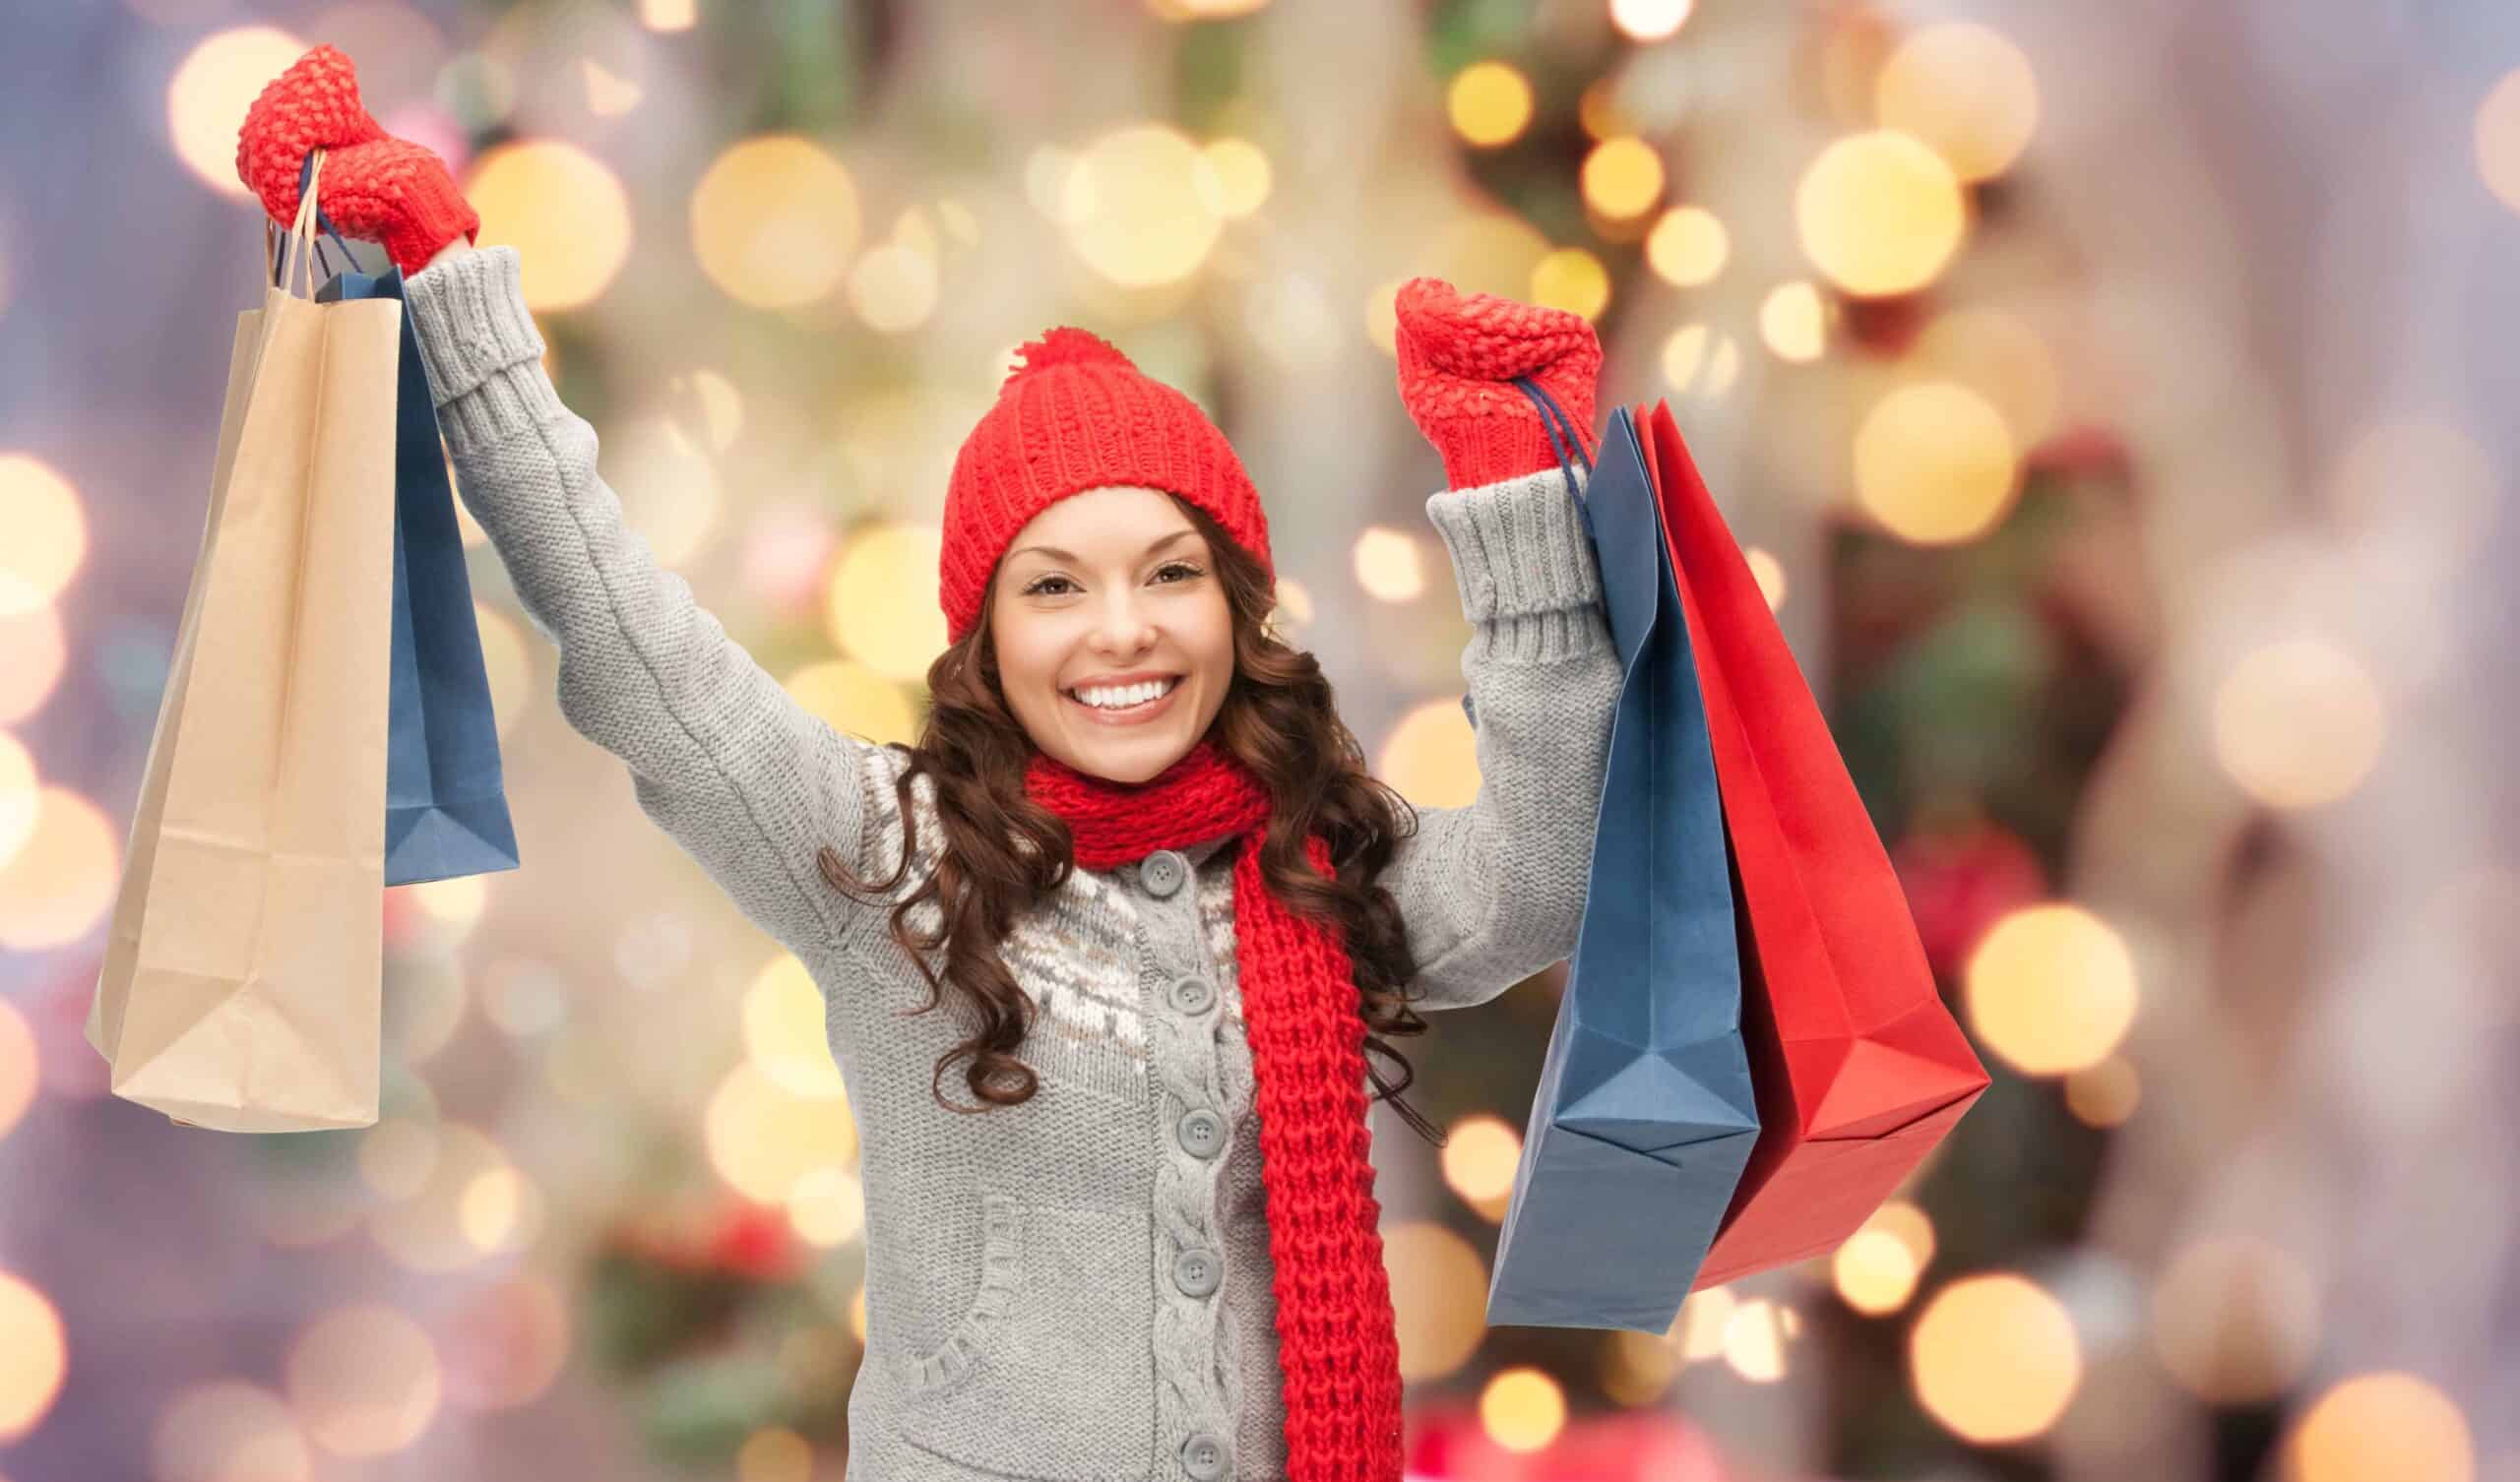 How do you thrive during Christmas shopping? Discover how these Christmas shopping tips and manners can help you have a full and rich experience.